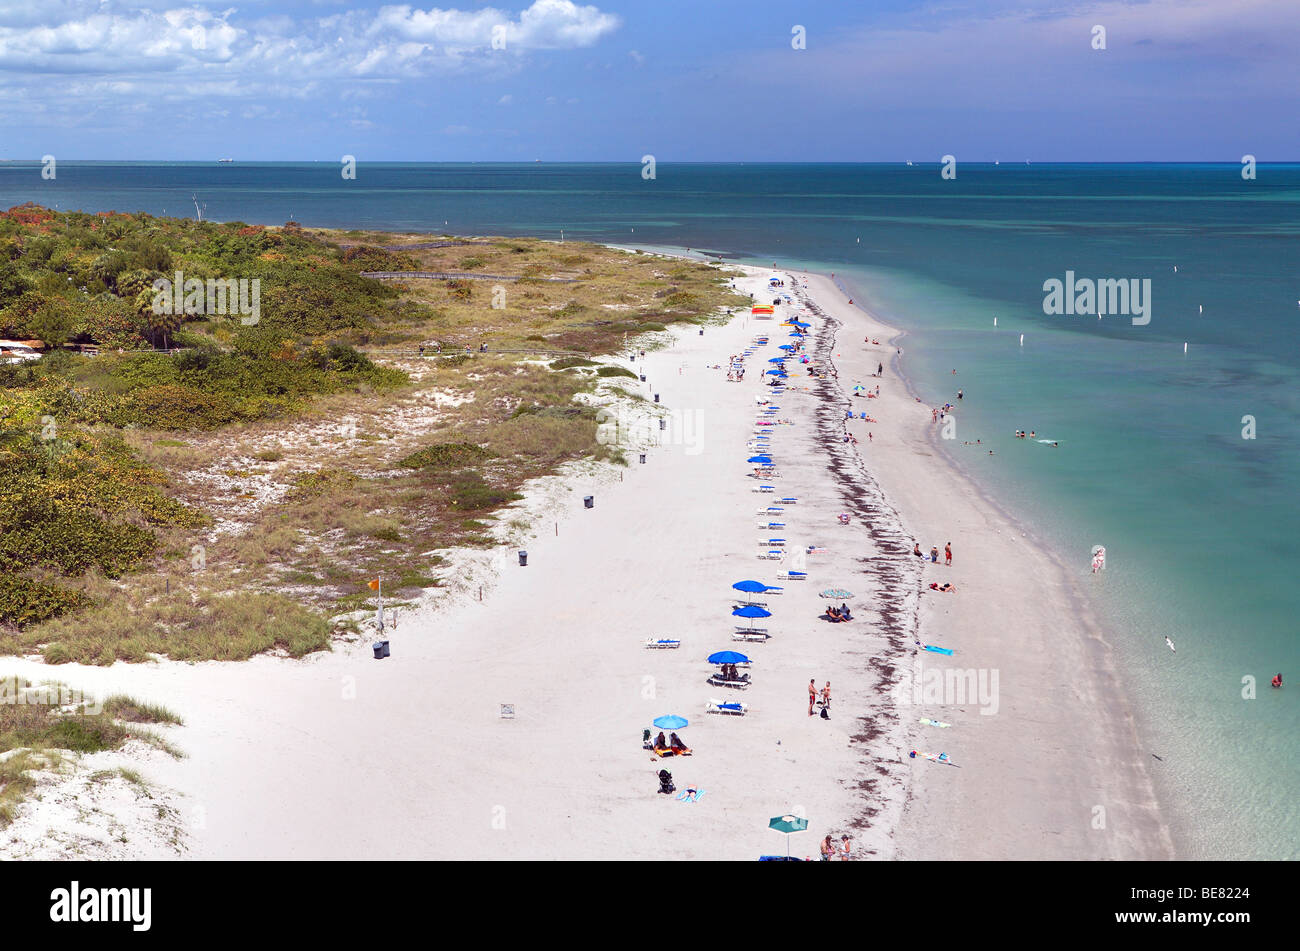 View at people at the beach at Bill Baggs State Park, Key Biscayne, Miami, Florida, USA Stock Photo